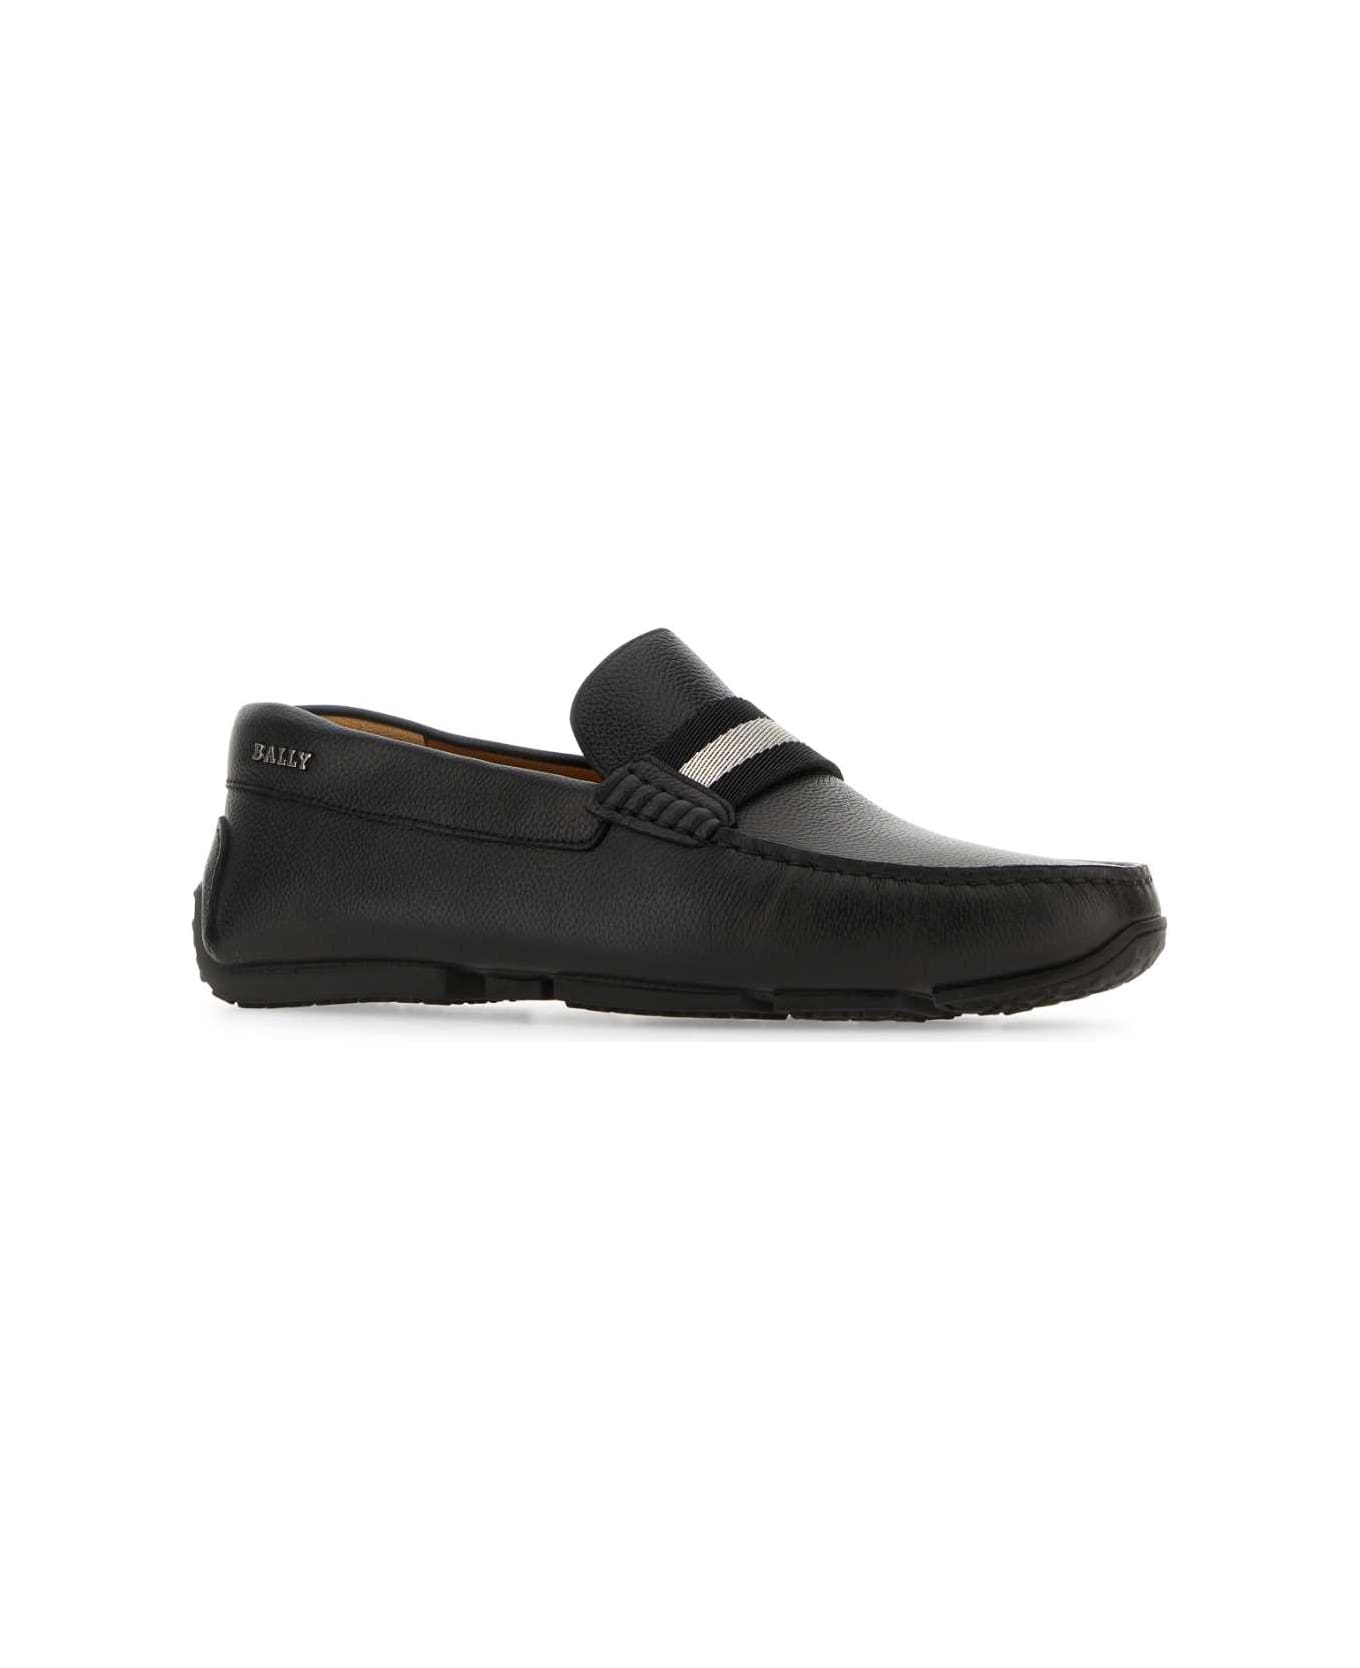 Bally Black Leather Pearce Loafers - BLACK